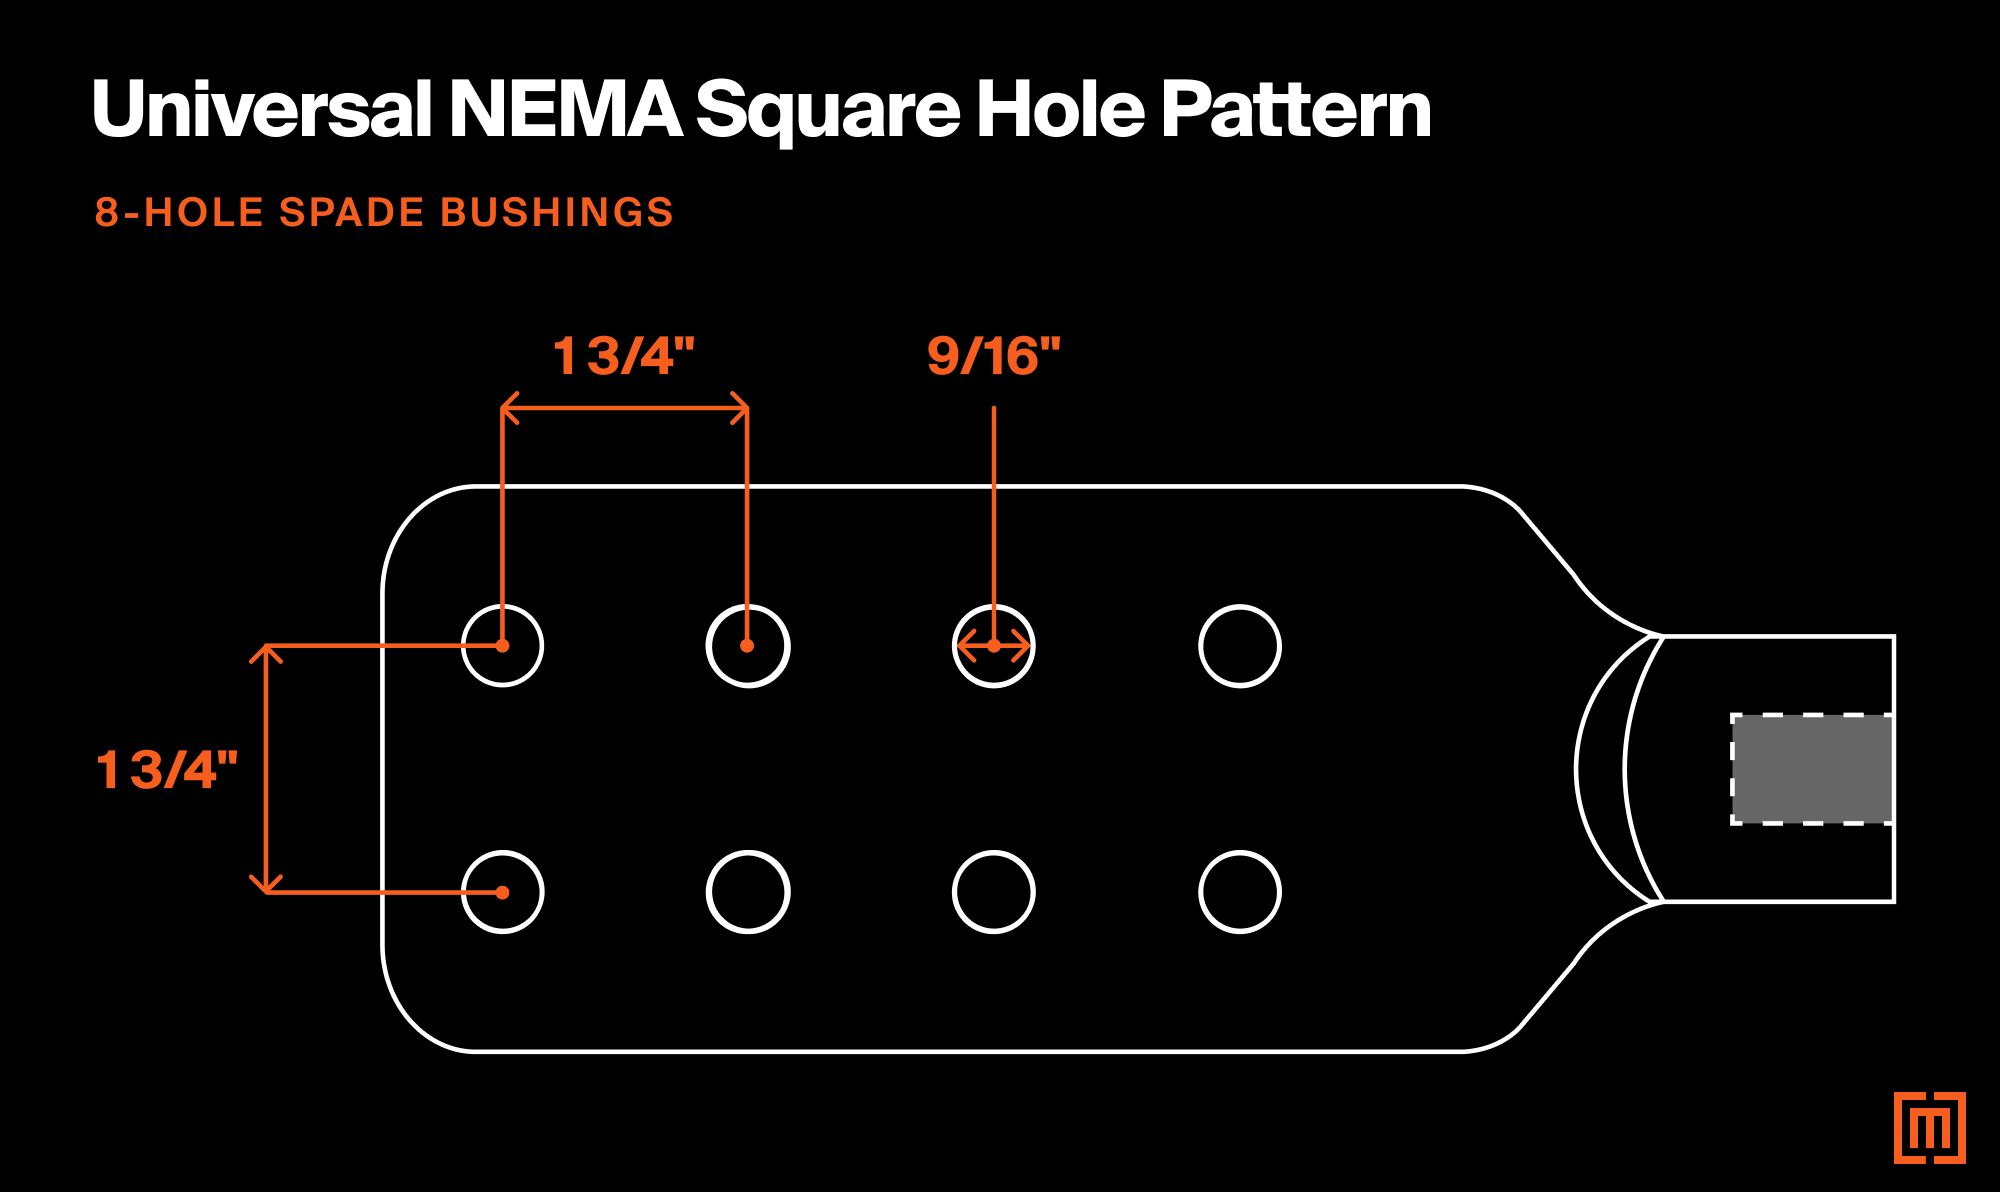 Diagram of a 8 - hole spade secondary or low voltage transformer bushing according to the Universal NEMA sqaure hole pattern